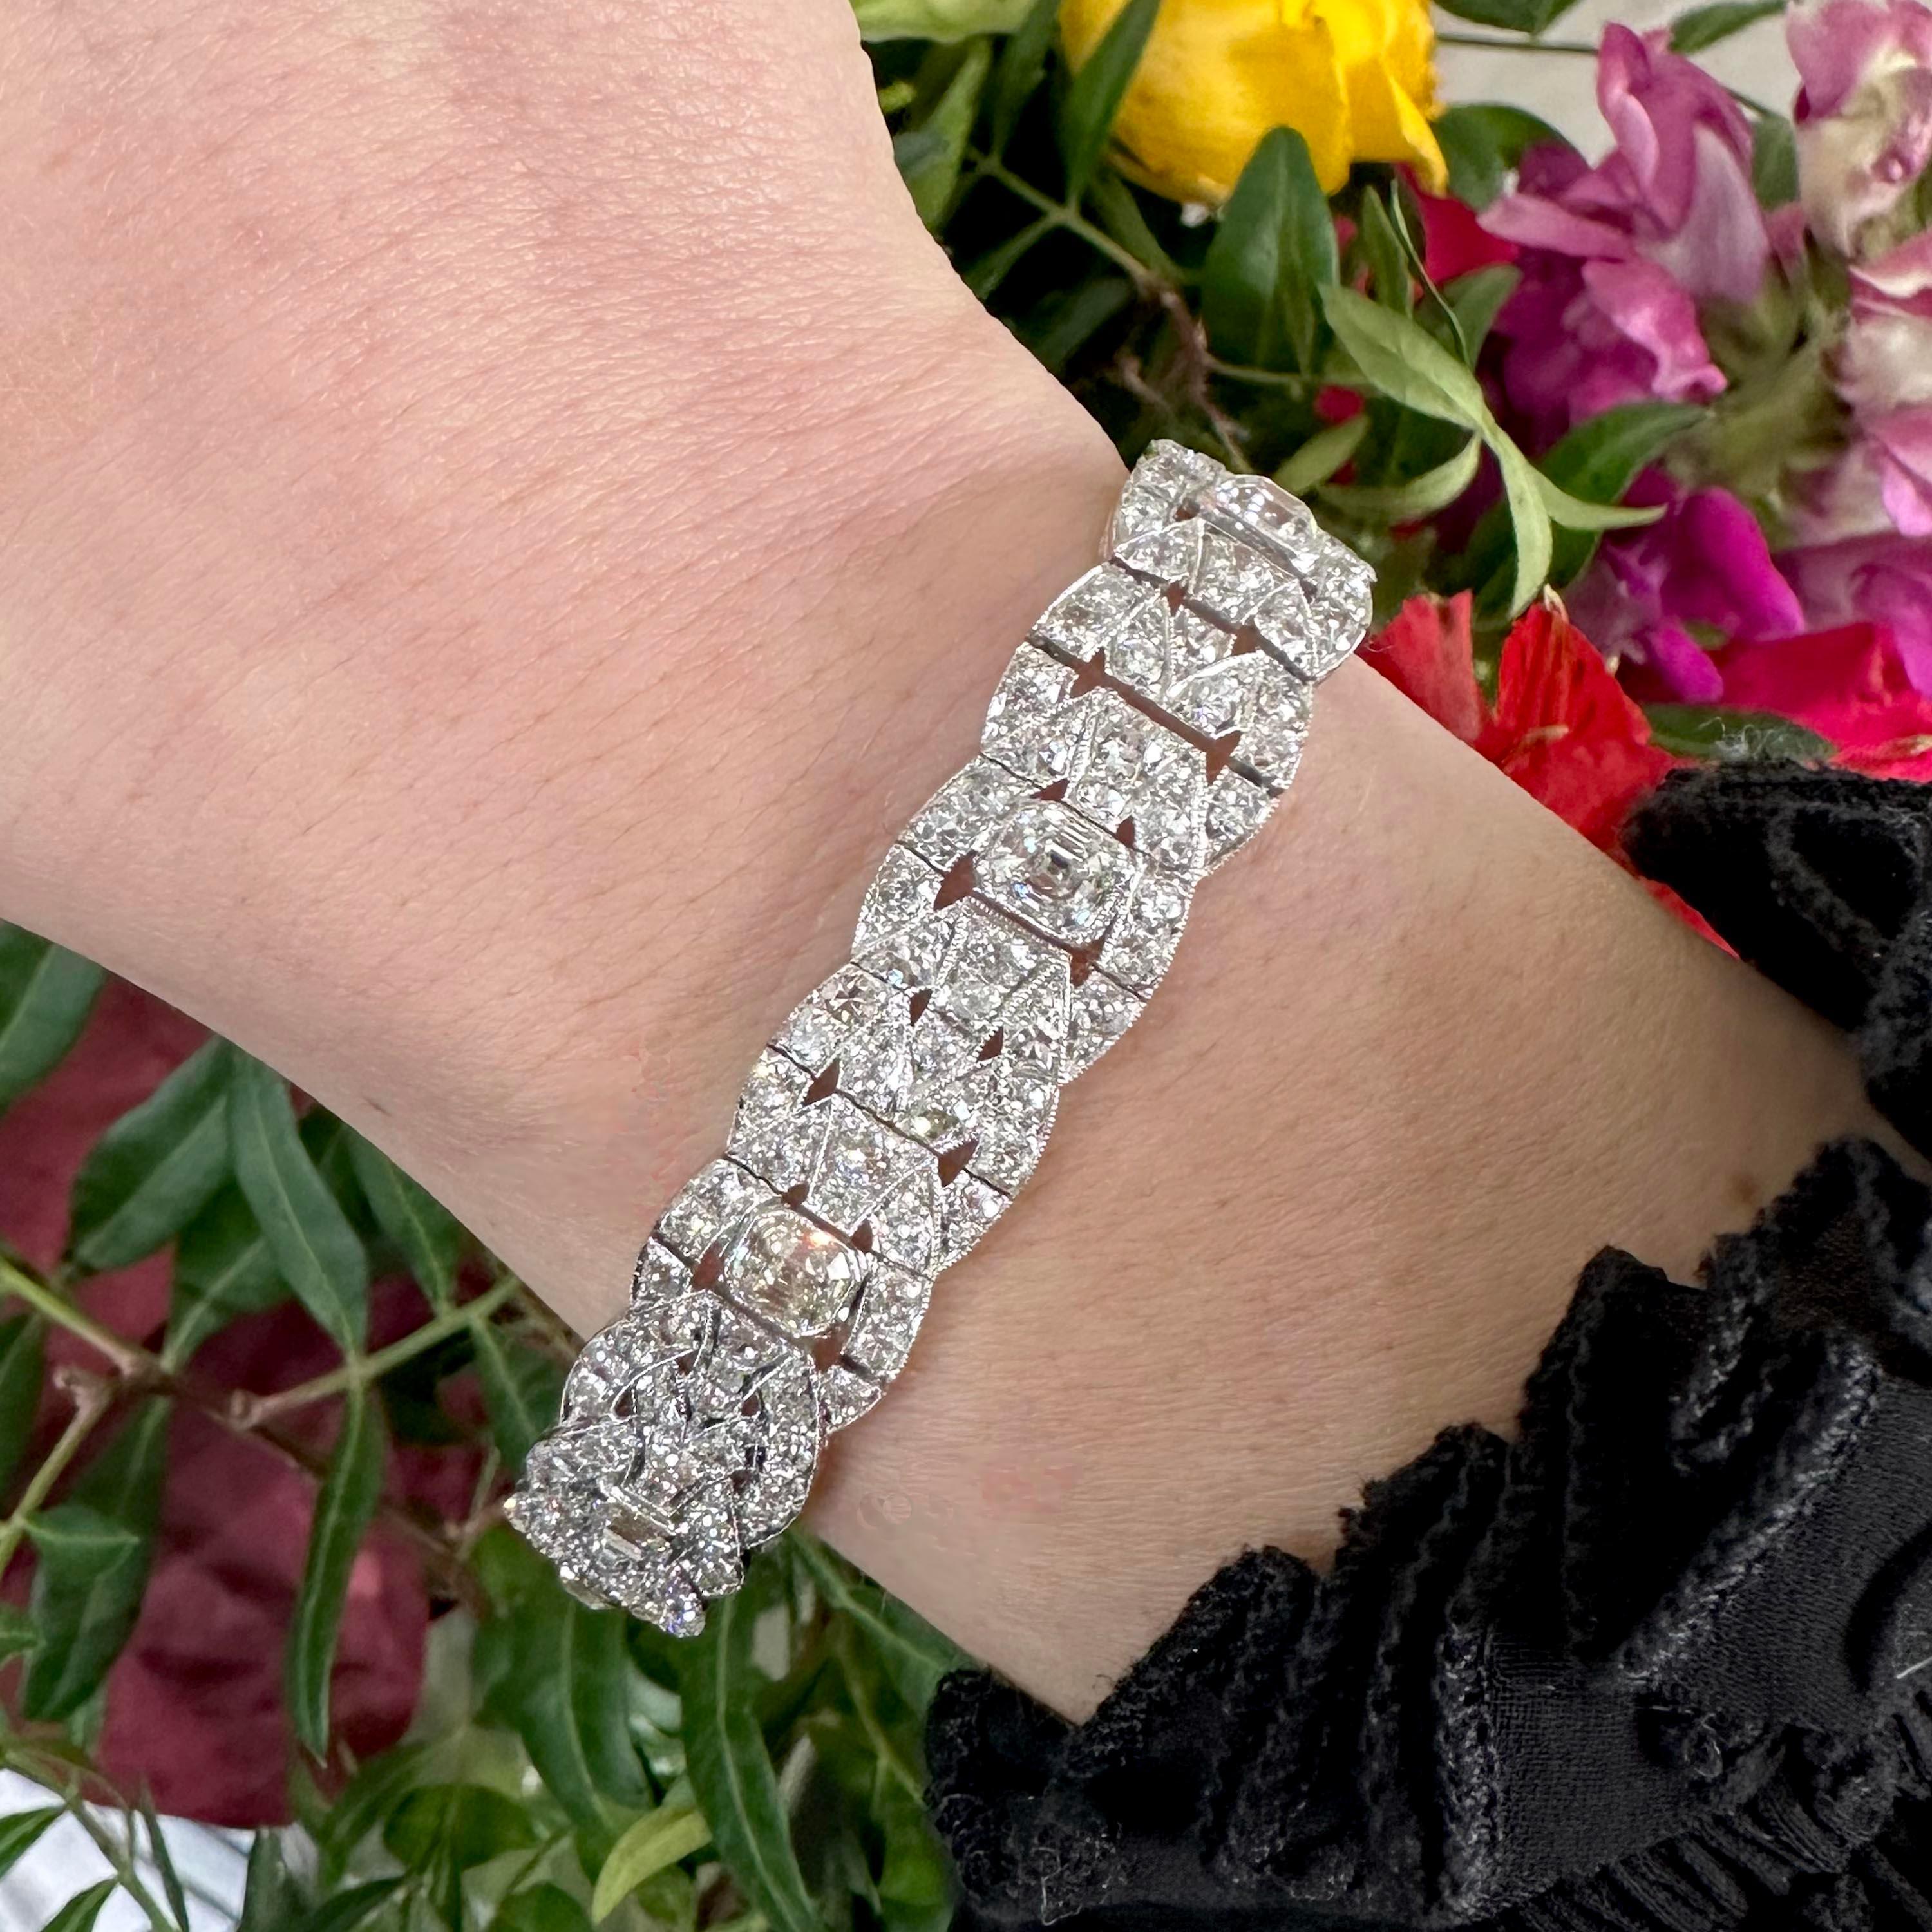 An Art Deco diamond bracelet, set with nine, emerald-cut diamonds, in rub over settings, in a repeat design of old-cut and eight-cut diamond set interlocking oval loops, tapering to Y shapes, with millegrain edged decoration, with scroll engraved